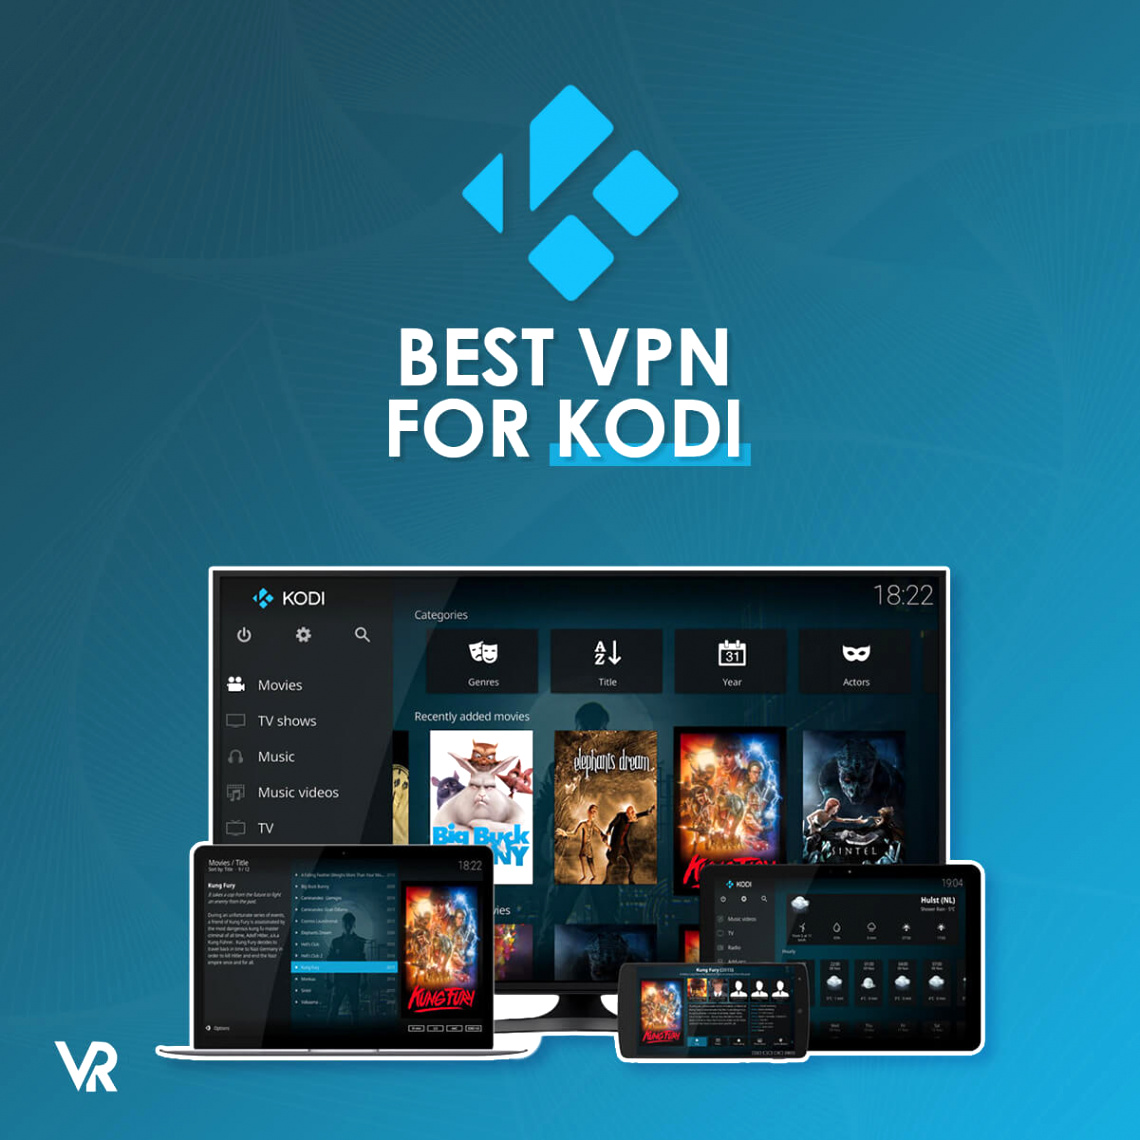 Vpn Services In Barry Mo Dans the Best Vpn for Kodi: Safe and Fast Streaming [2022]